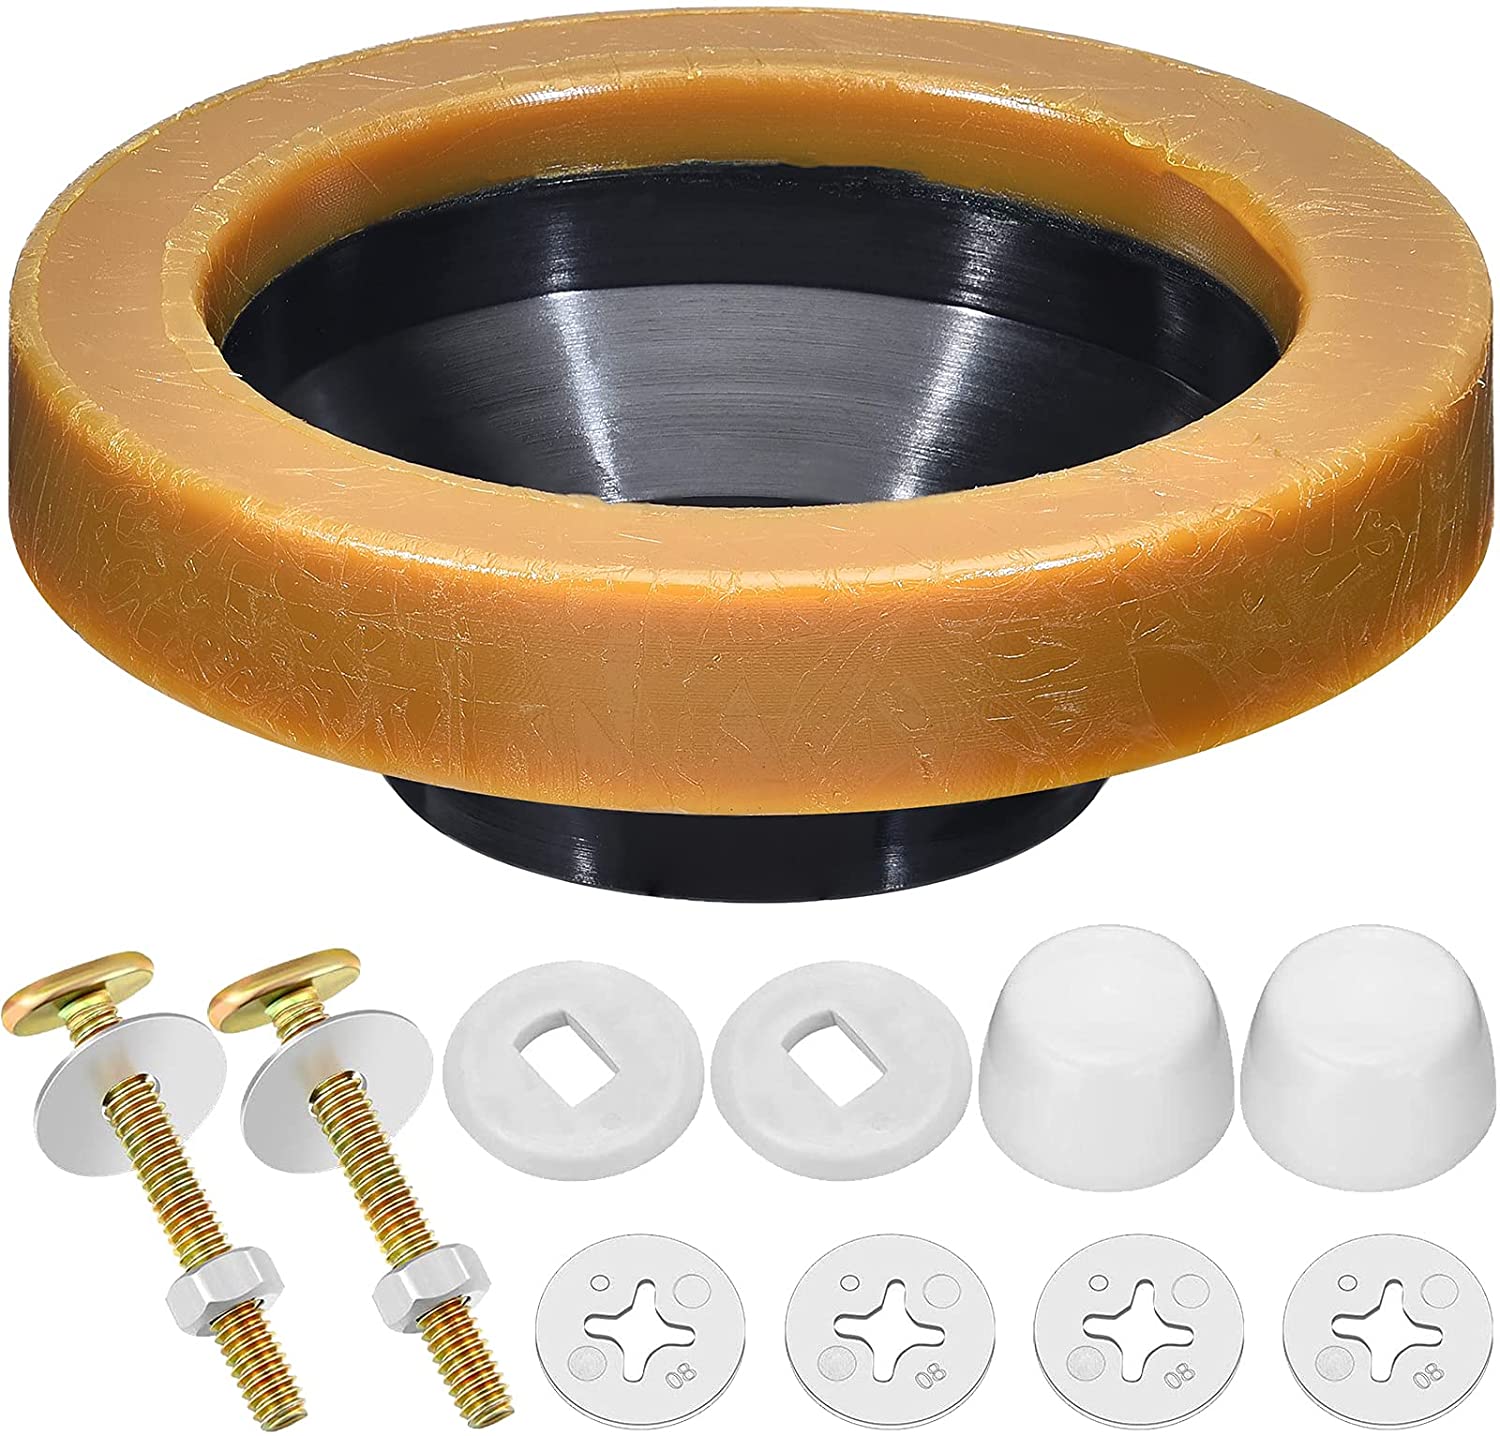 Extra Thick Toilet Wax Ring